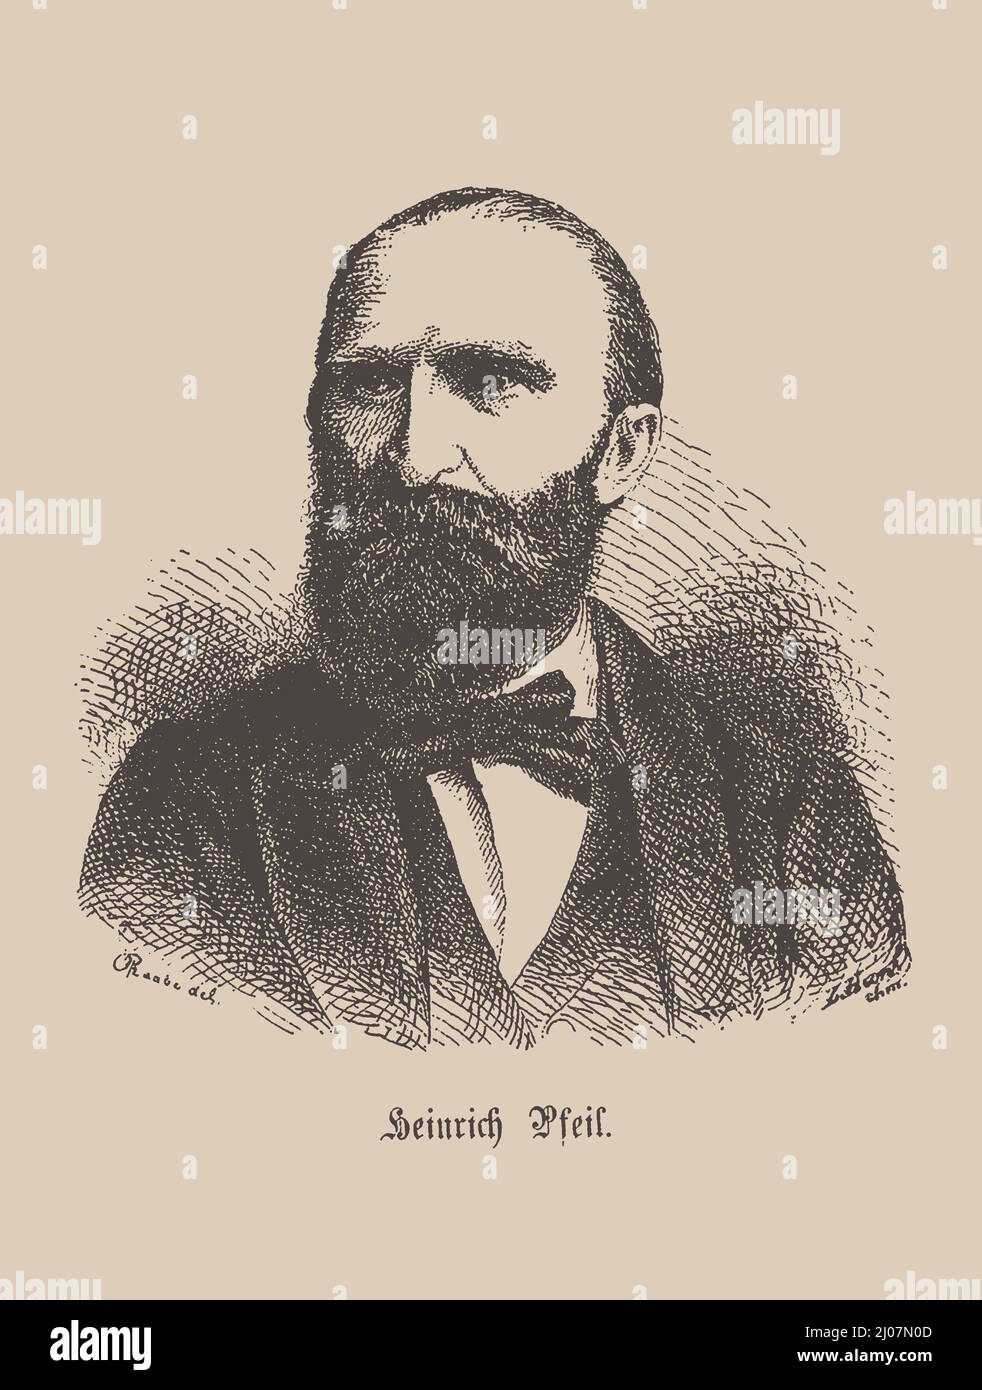 Portrait of the composer Heinrich Pfeil (1835-1899). Museum: PRIVATE COLLECTION. Author: WILHELM RAABE. Stock Photo